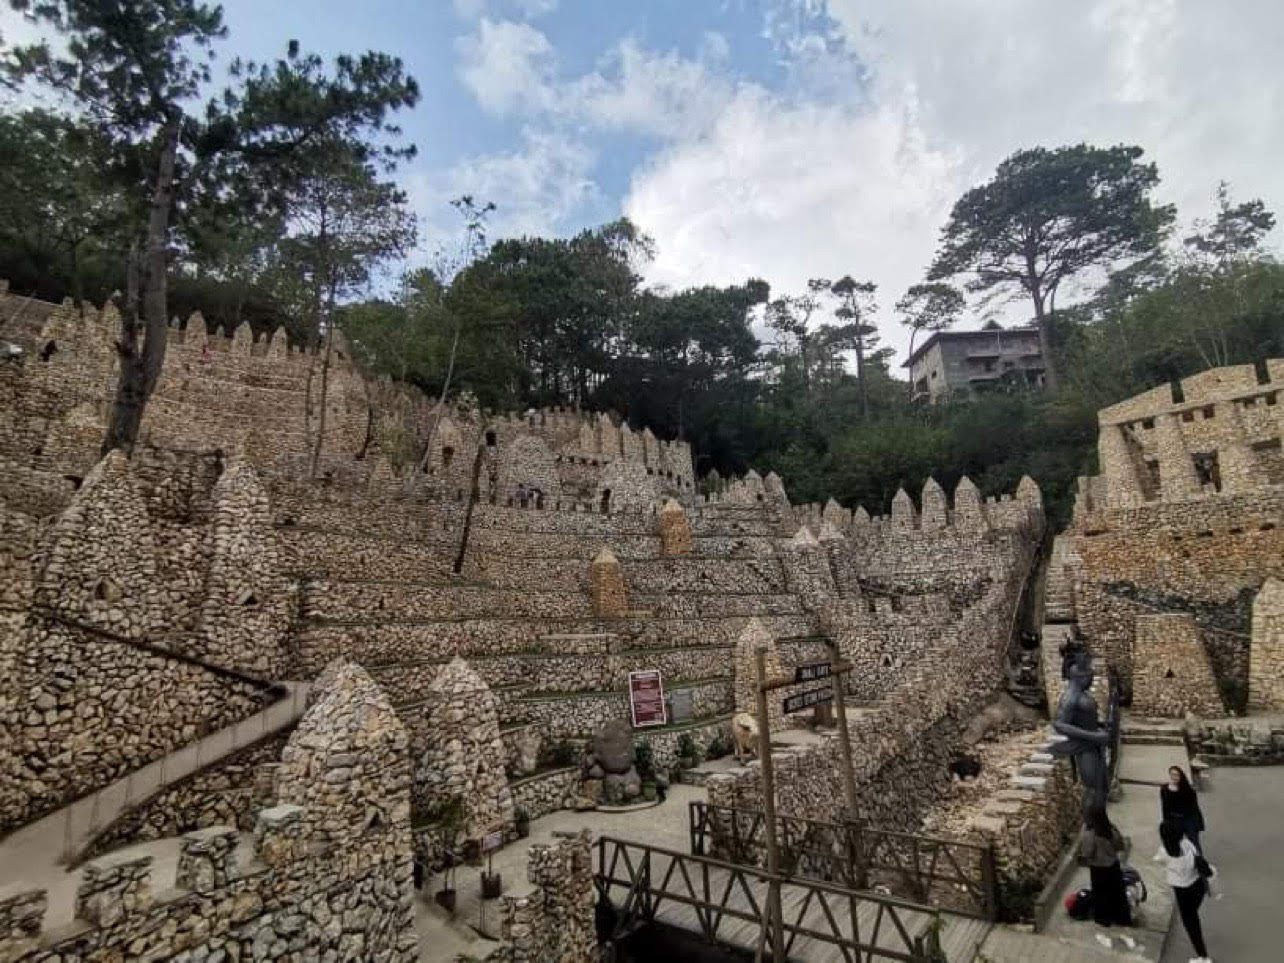 Baguio’s Igorot Stone Kingdom shut down over permit and safety issues